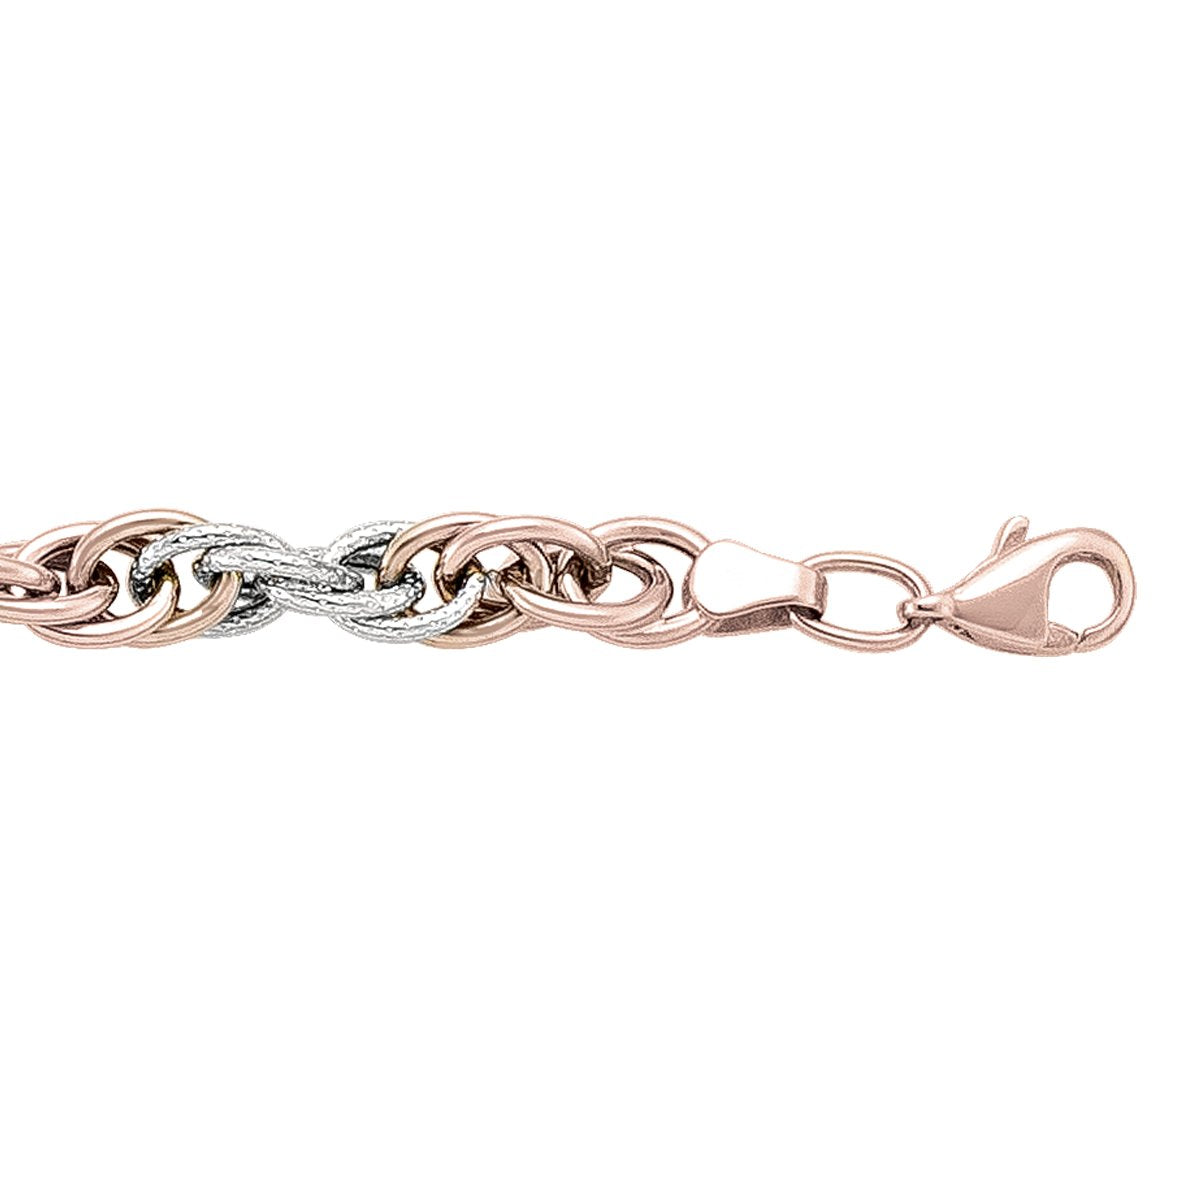 LADIES BRACELETS PINK AND WHITE GOLD FANCY HOLLOW 